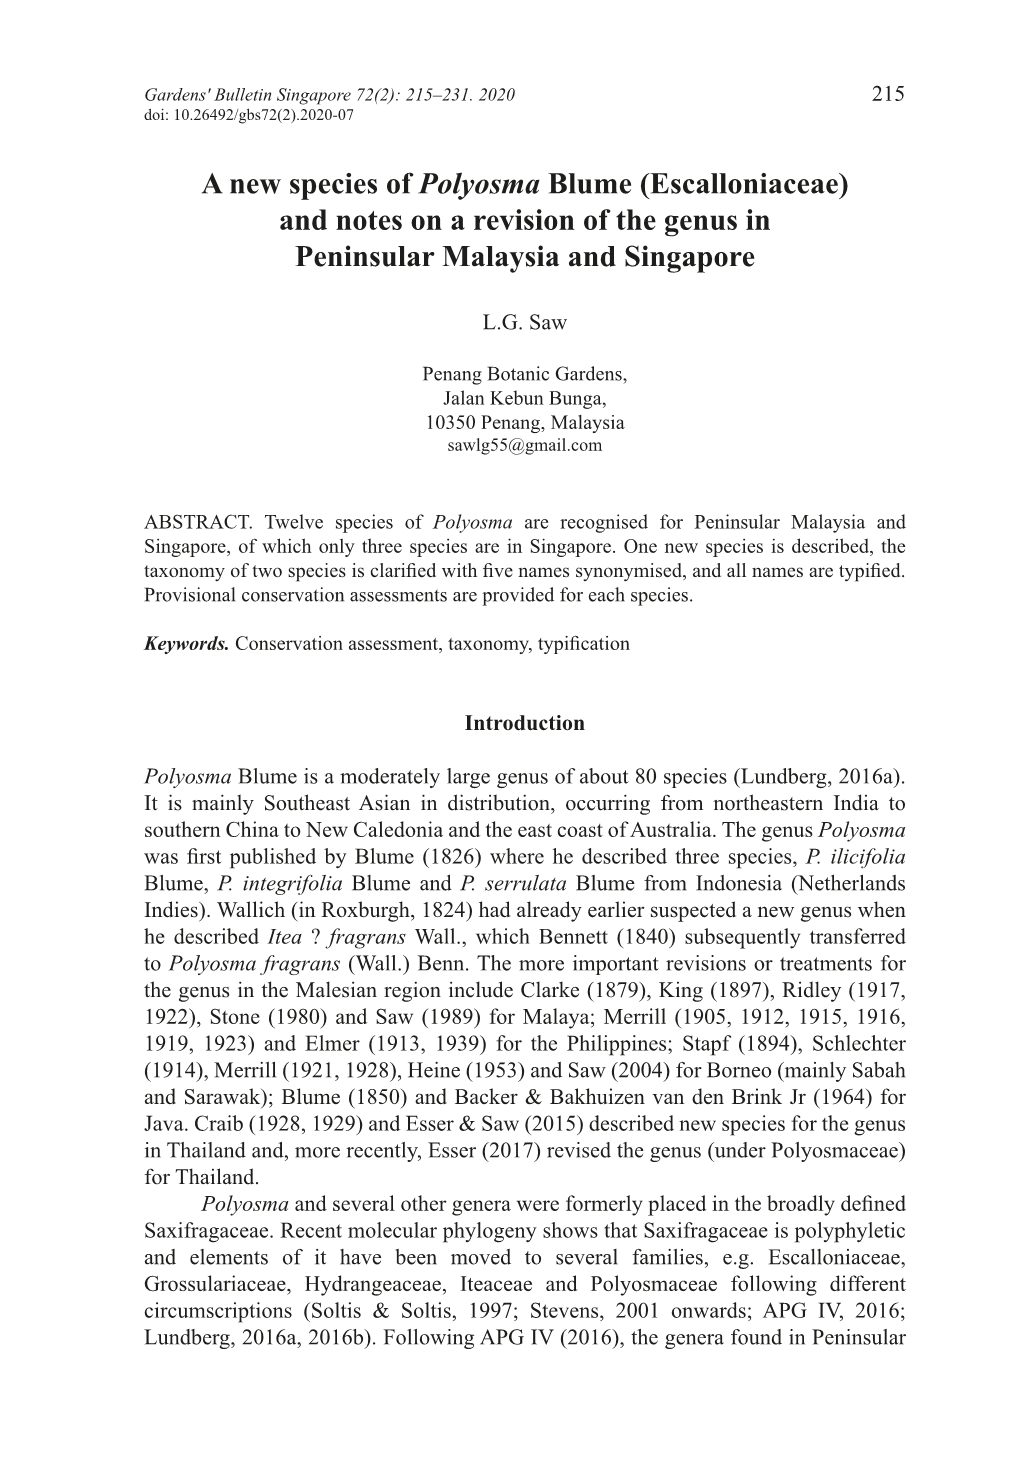 Escalloniaceae) and Notes on a Revision of the Genus in Peninsular Malaysia and Singapore